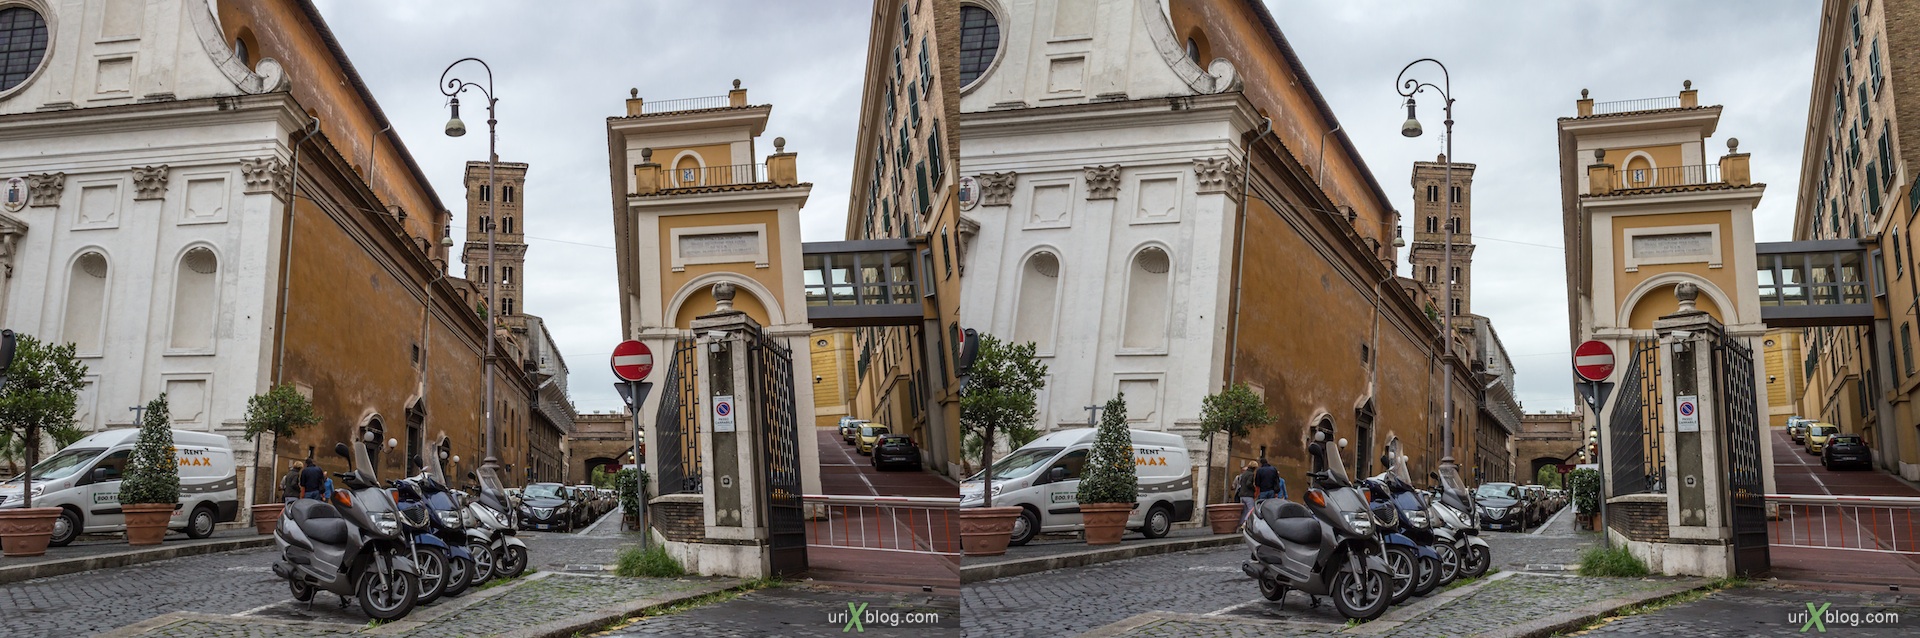 2012, Vatican, Rome, Italy, 3D, stereo pair, cross-eyed, crossview, cross view stereo pair